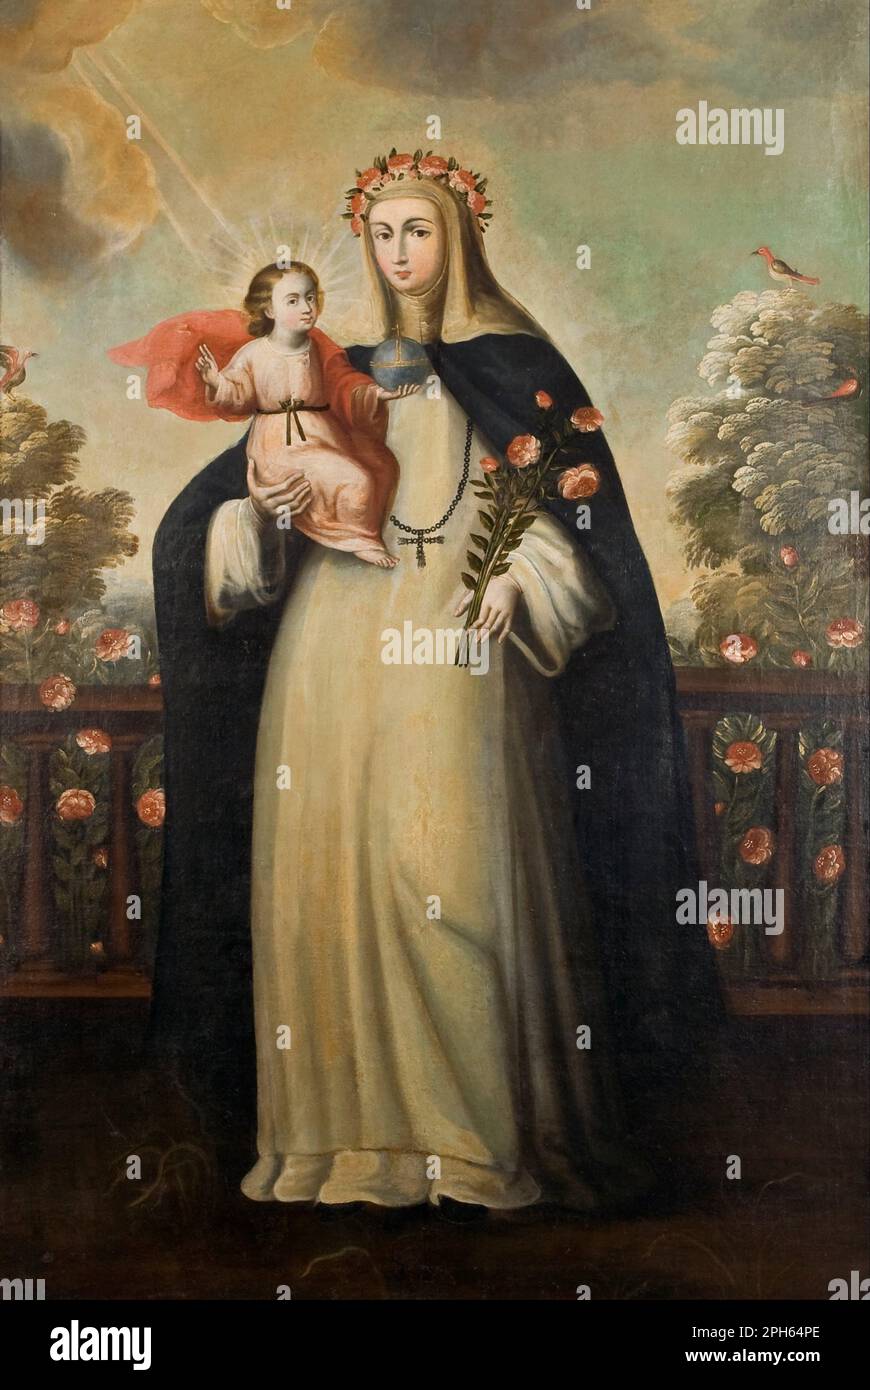 Saint Rose of Lima with Child Jesus (ca. 1680 - ca. 1700) by Cuzco School Stock Photo